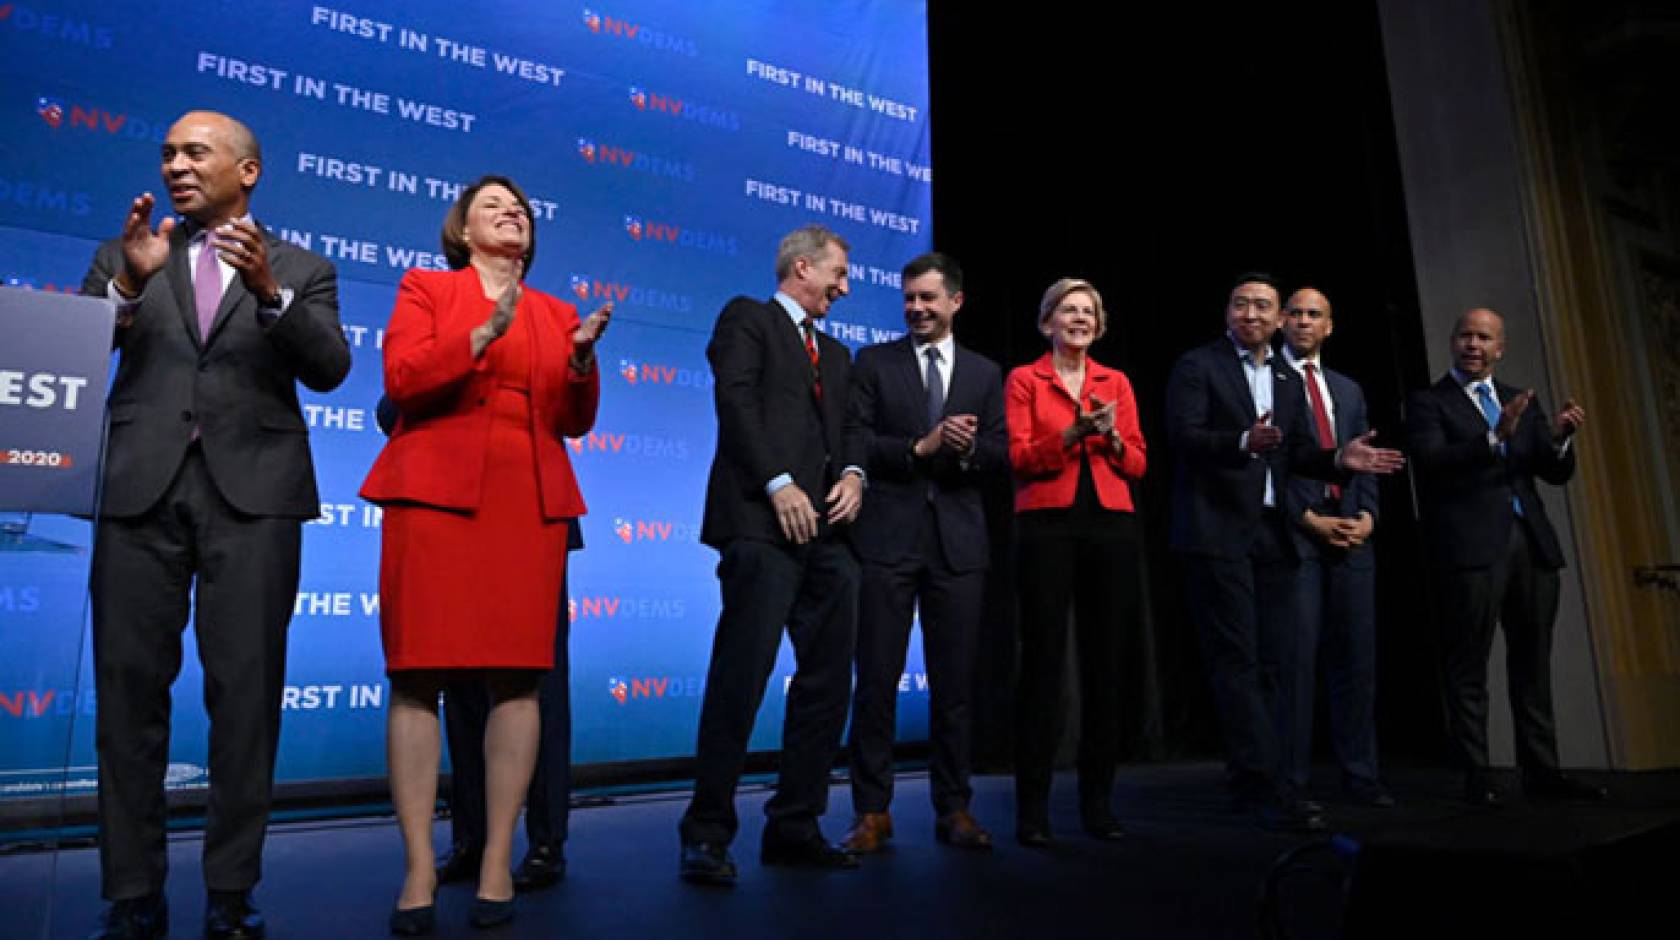 Candidates on a debate stage